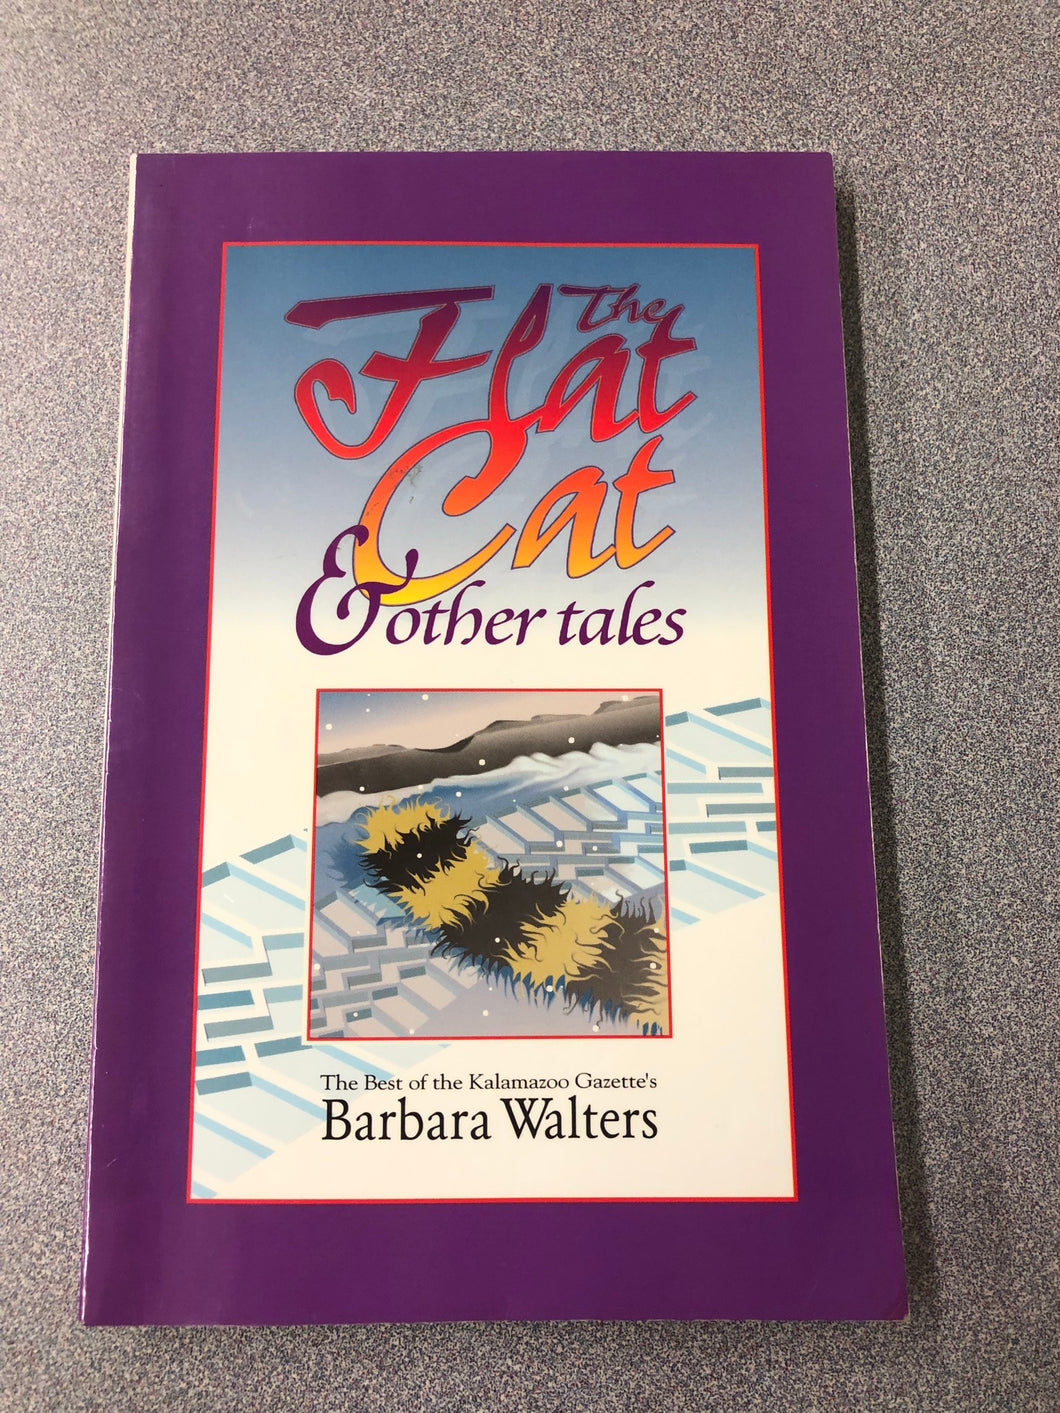 The Flat Cat and Other Tales: the Best of the Kalamazoo Gazette's Barbara Walters, Barbara Walters [1996] AF 8/21